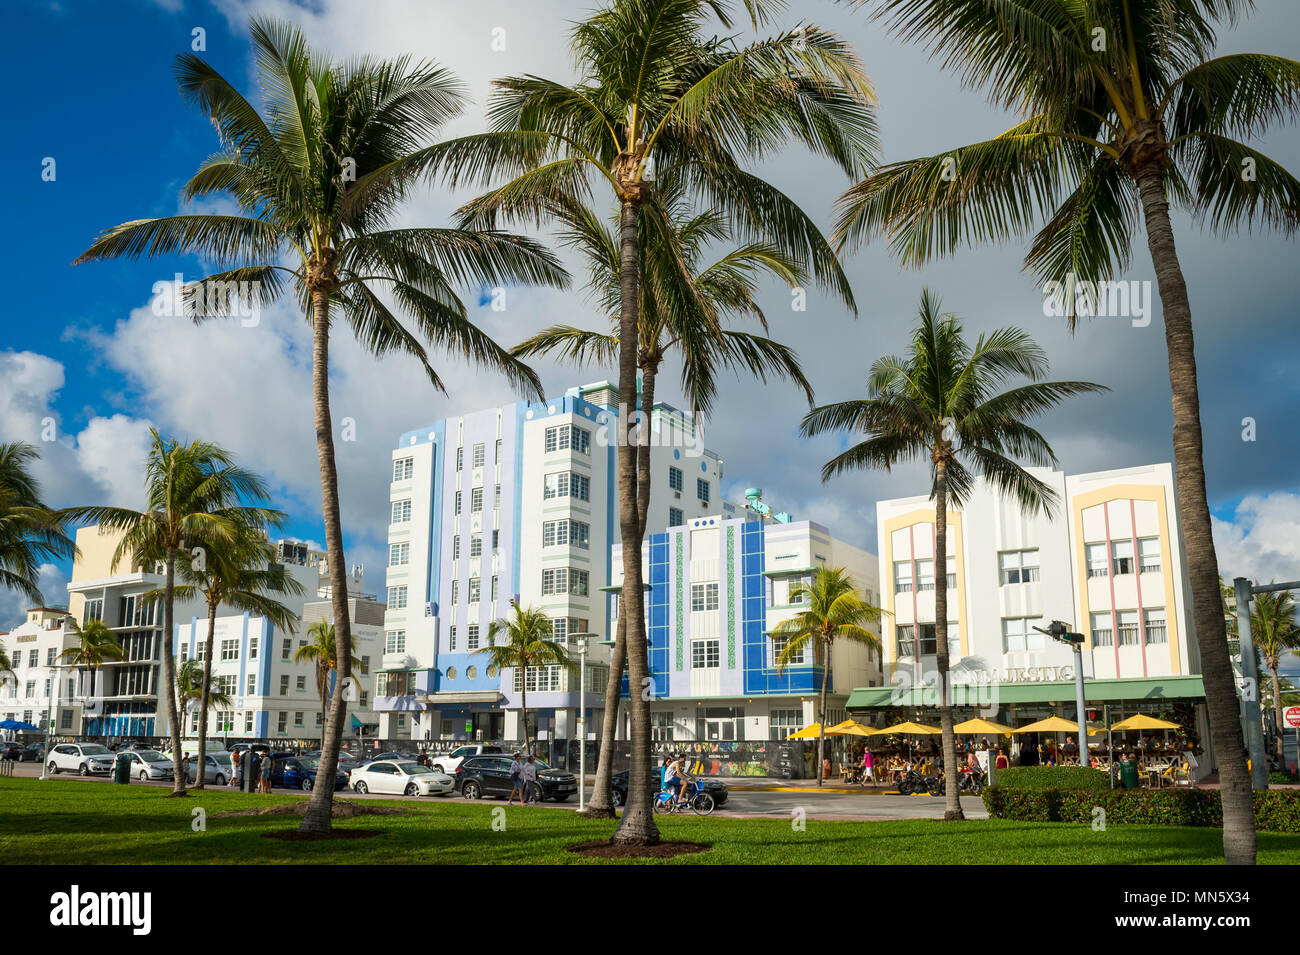 MIAMI - CIRCA JANUARY, 2018: Restaurants on the tourist strip of Ocean Drive stand ready for morning customers in South Beach. Stock Photo